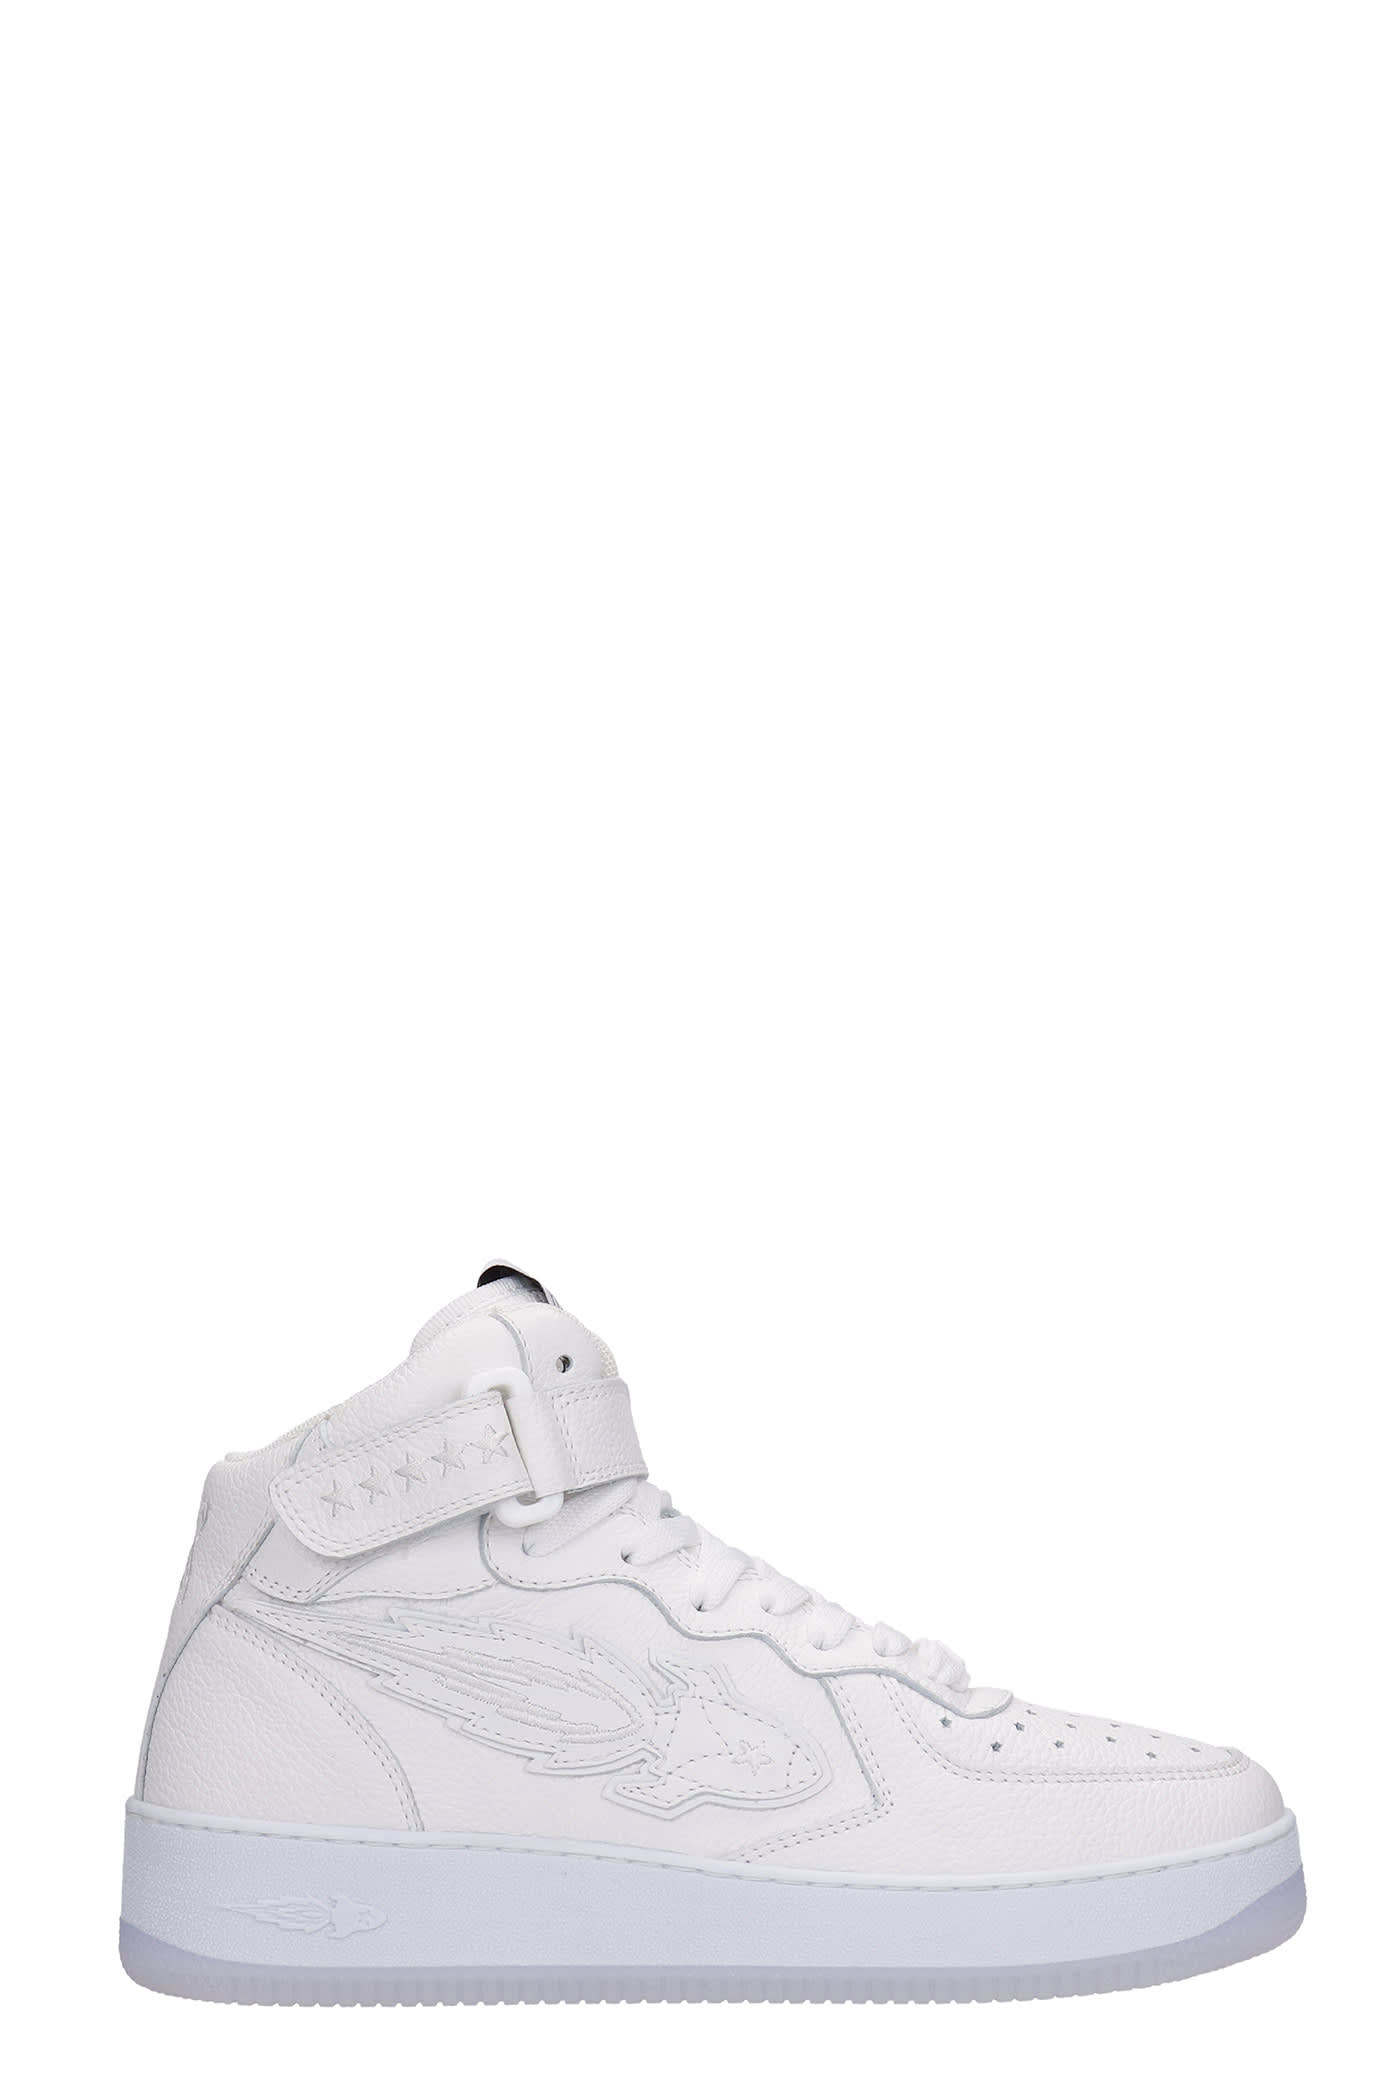 ENTERPRISE JAPAN SNEAKERS IN WHITE LEATHER,BB1003PX10801111